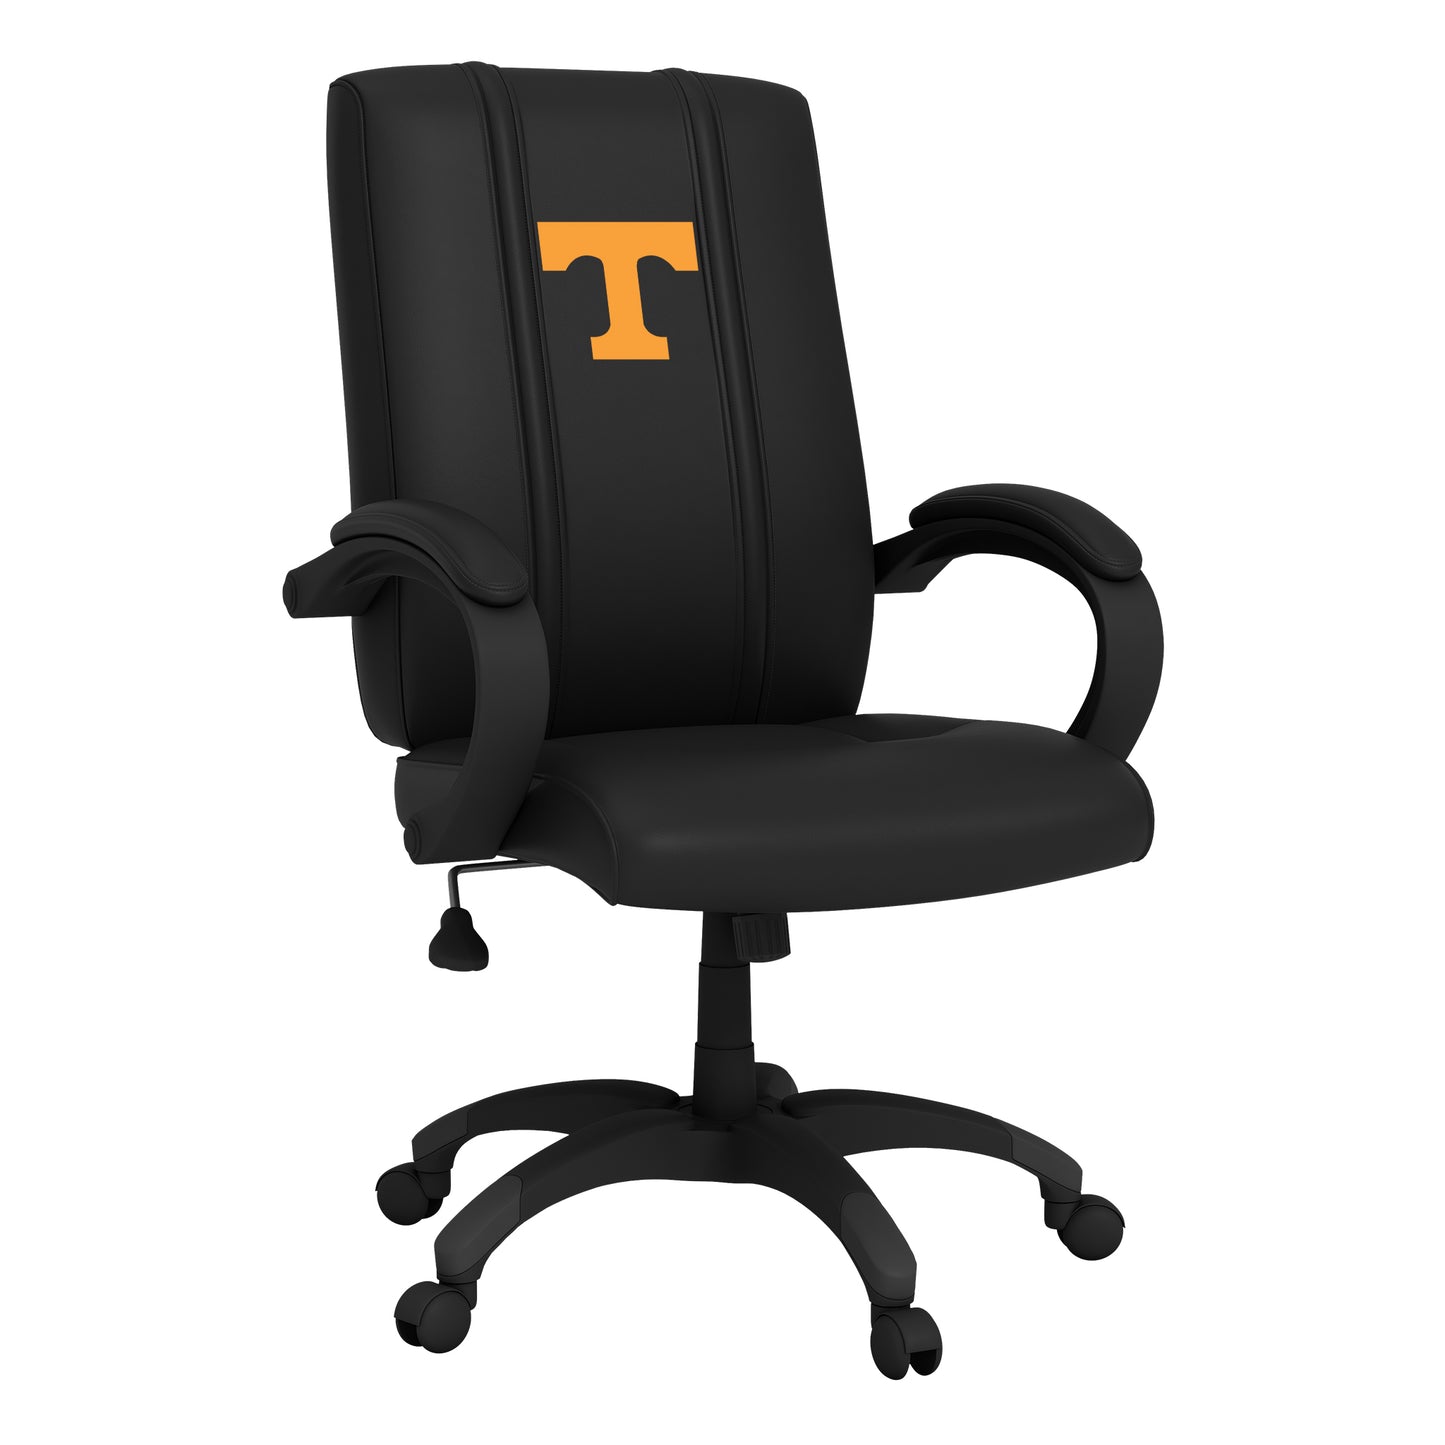 Office Chair 1000 with Tennessee Volunteers Logo